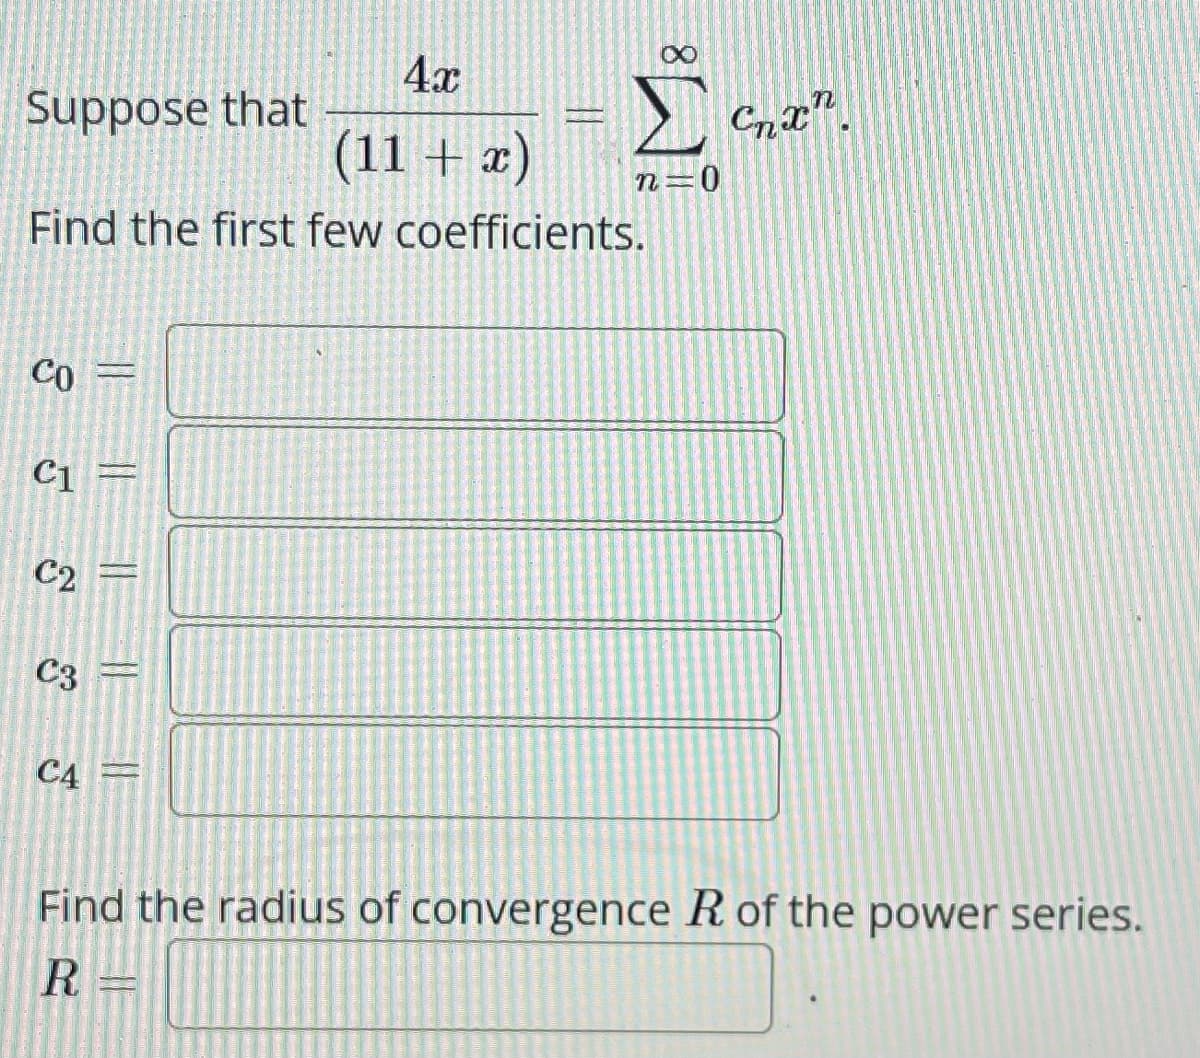 4x
(11 + x)
Find the first few coefficients.
Suppose that
CO=
C1 =
C₂ =
C3
C4
Σ Chan
n=0
Find the radius of convergence R of the power series.
R=